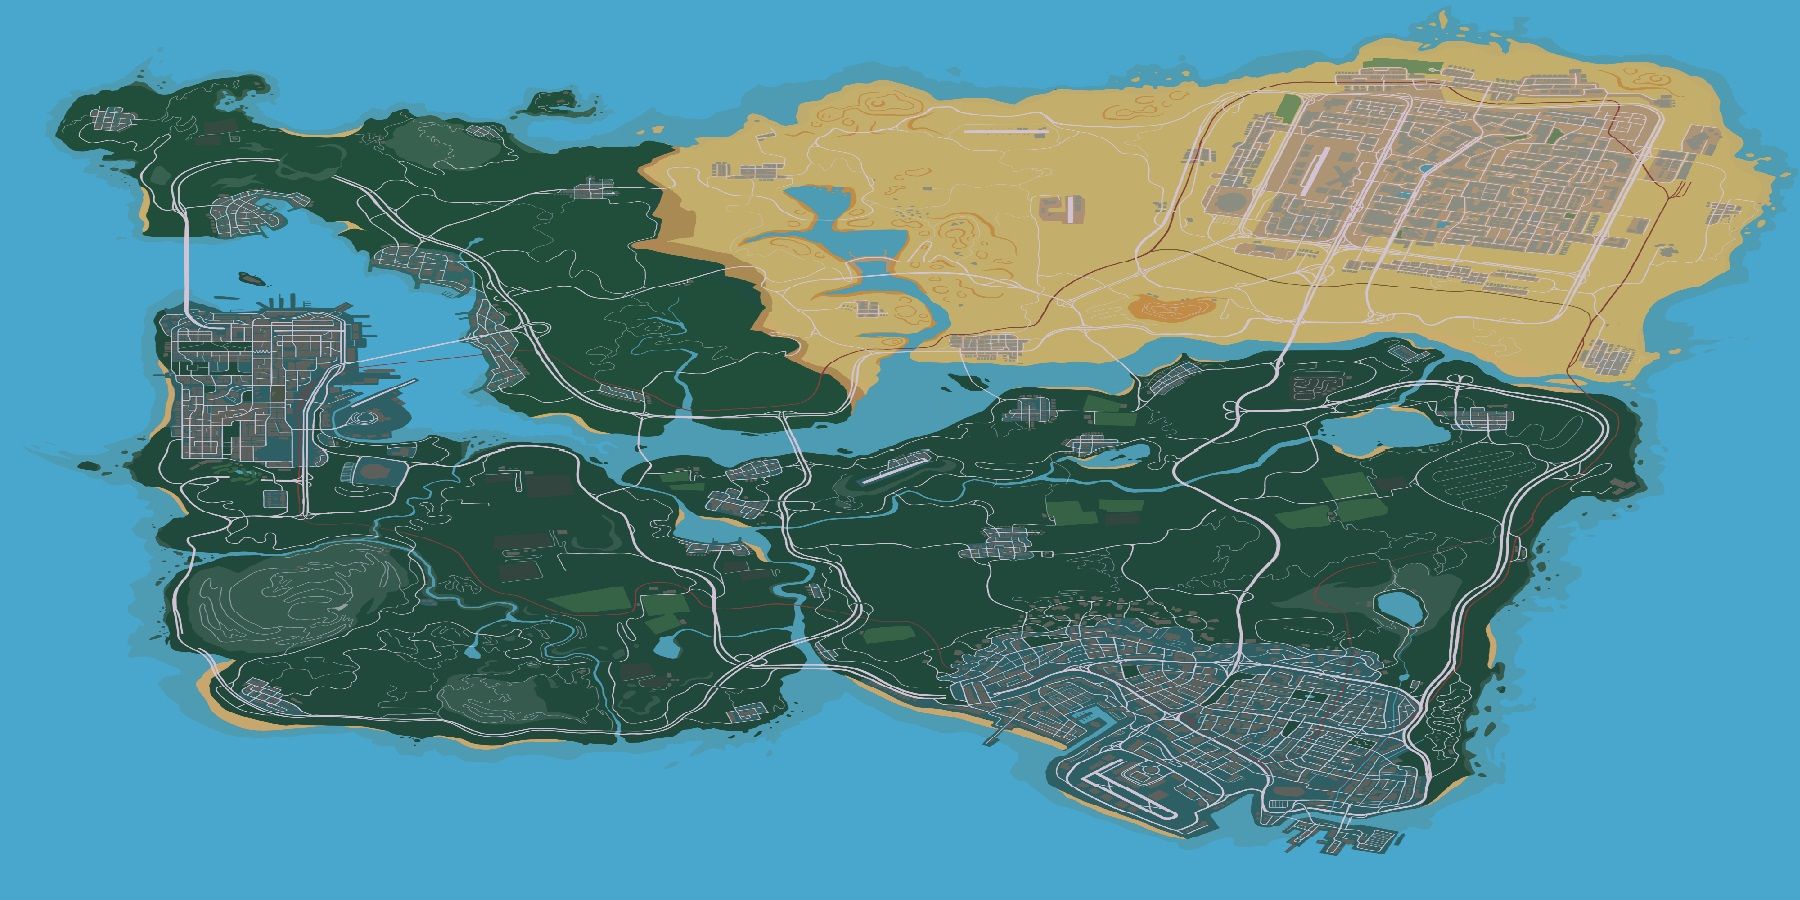 Friends I have updated my GTA map, I expanded the map now the